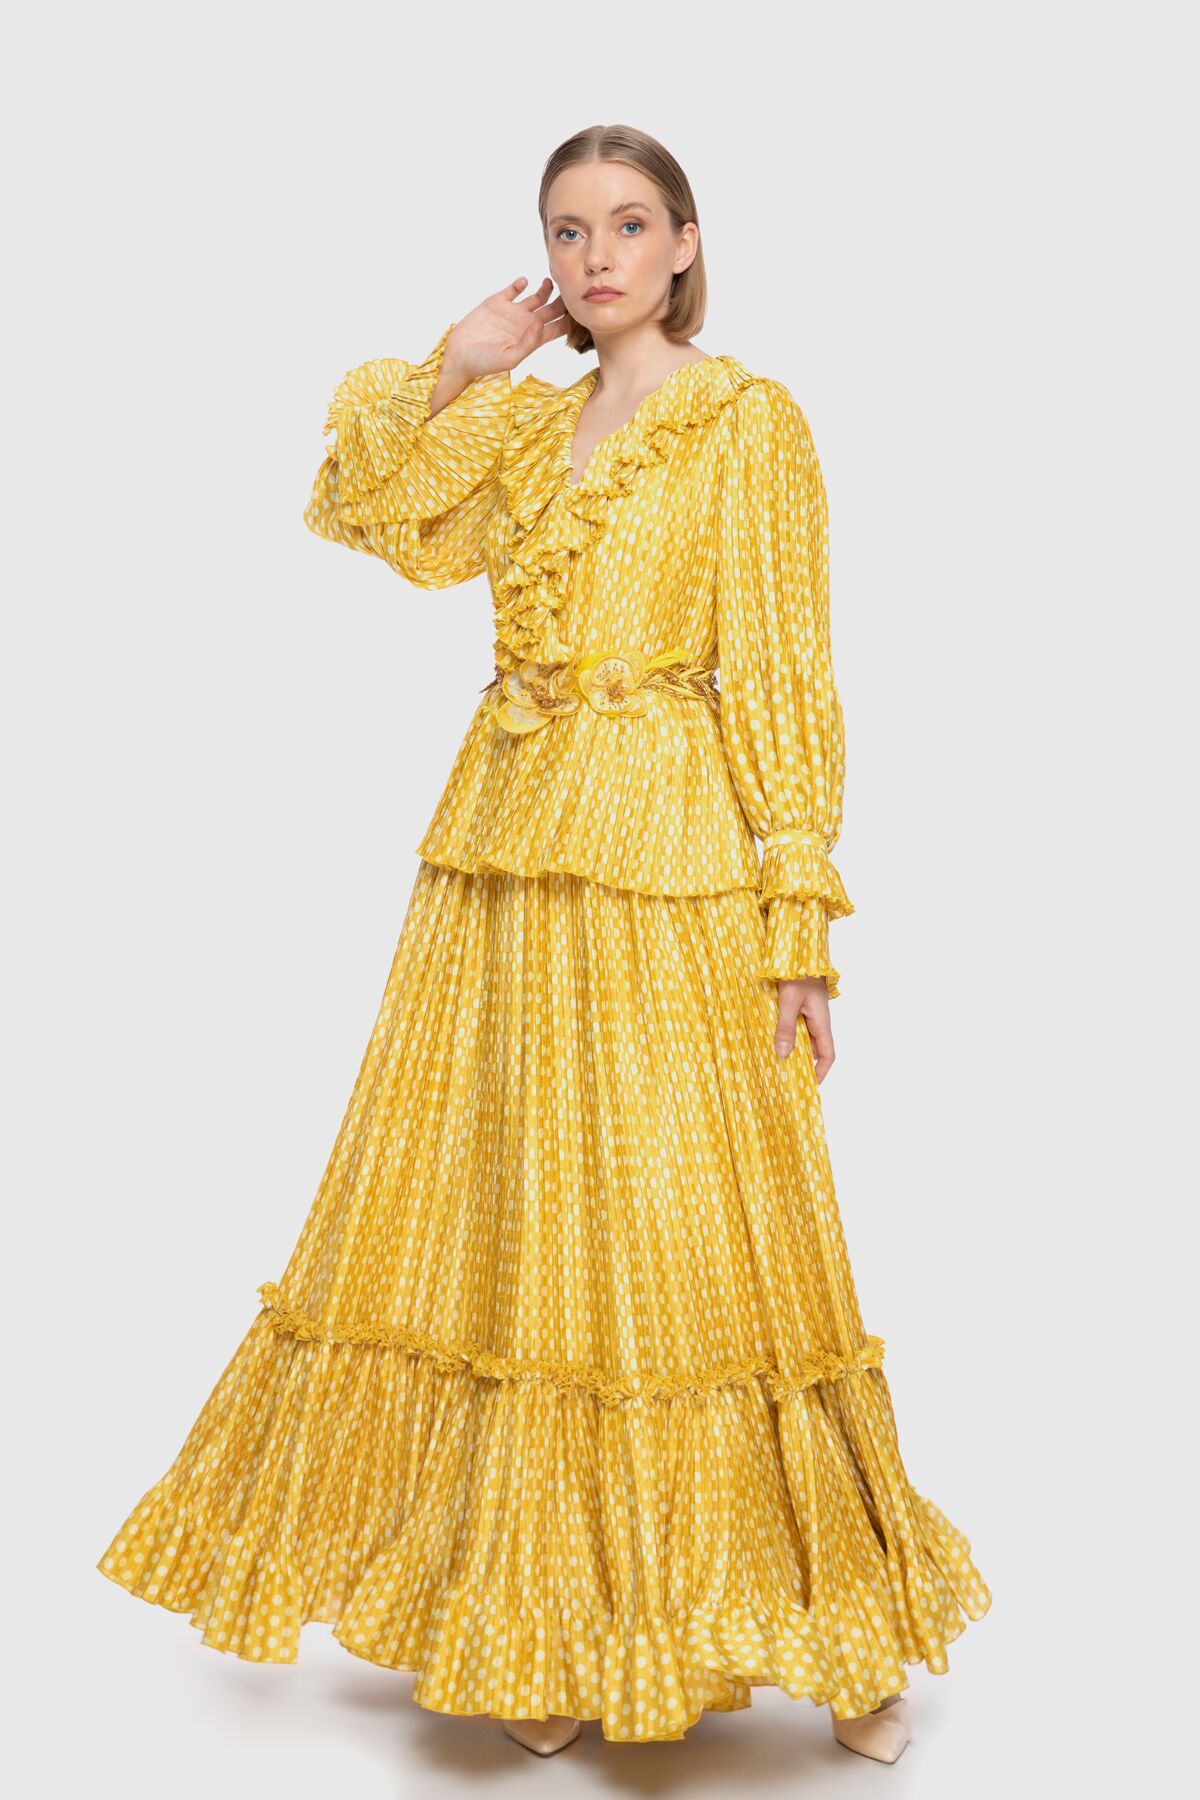  GIZIA - With Flower Belt Accessory Long Polka Dot Patterned Yellow Dress